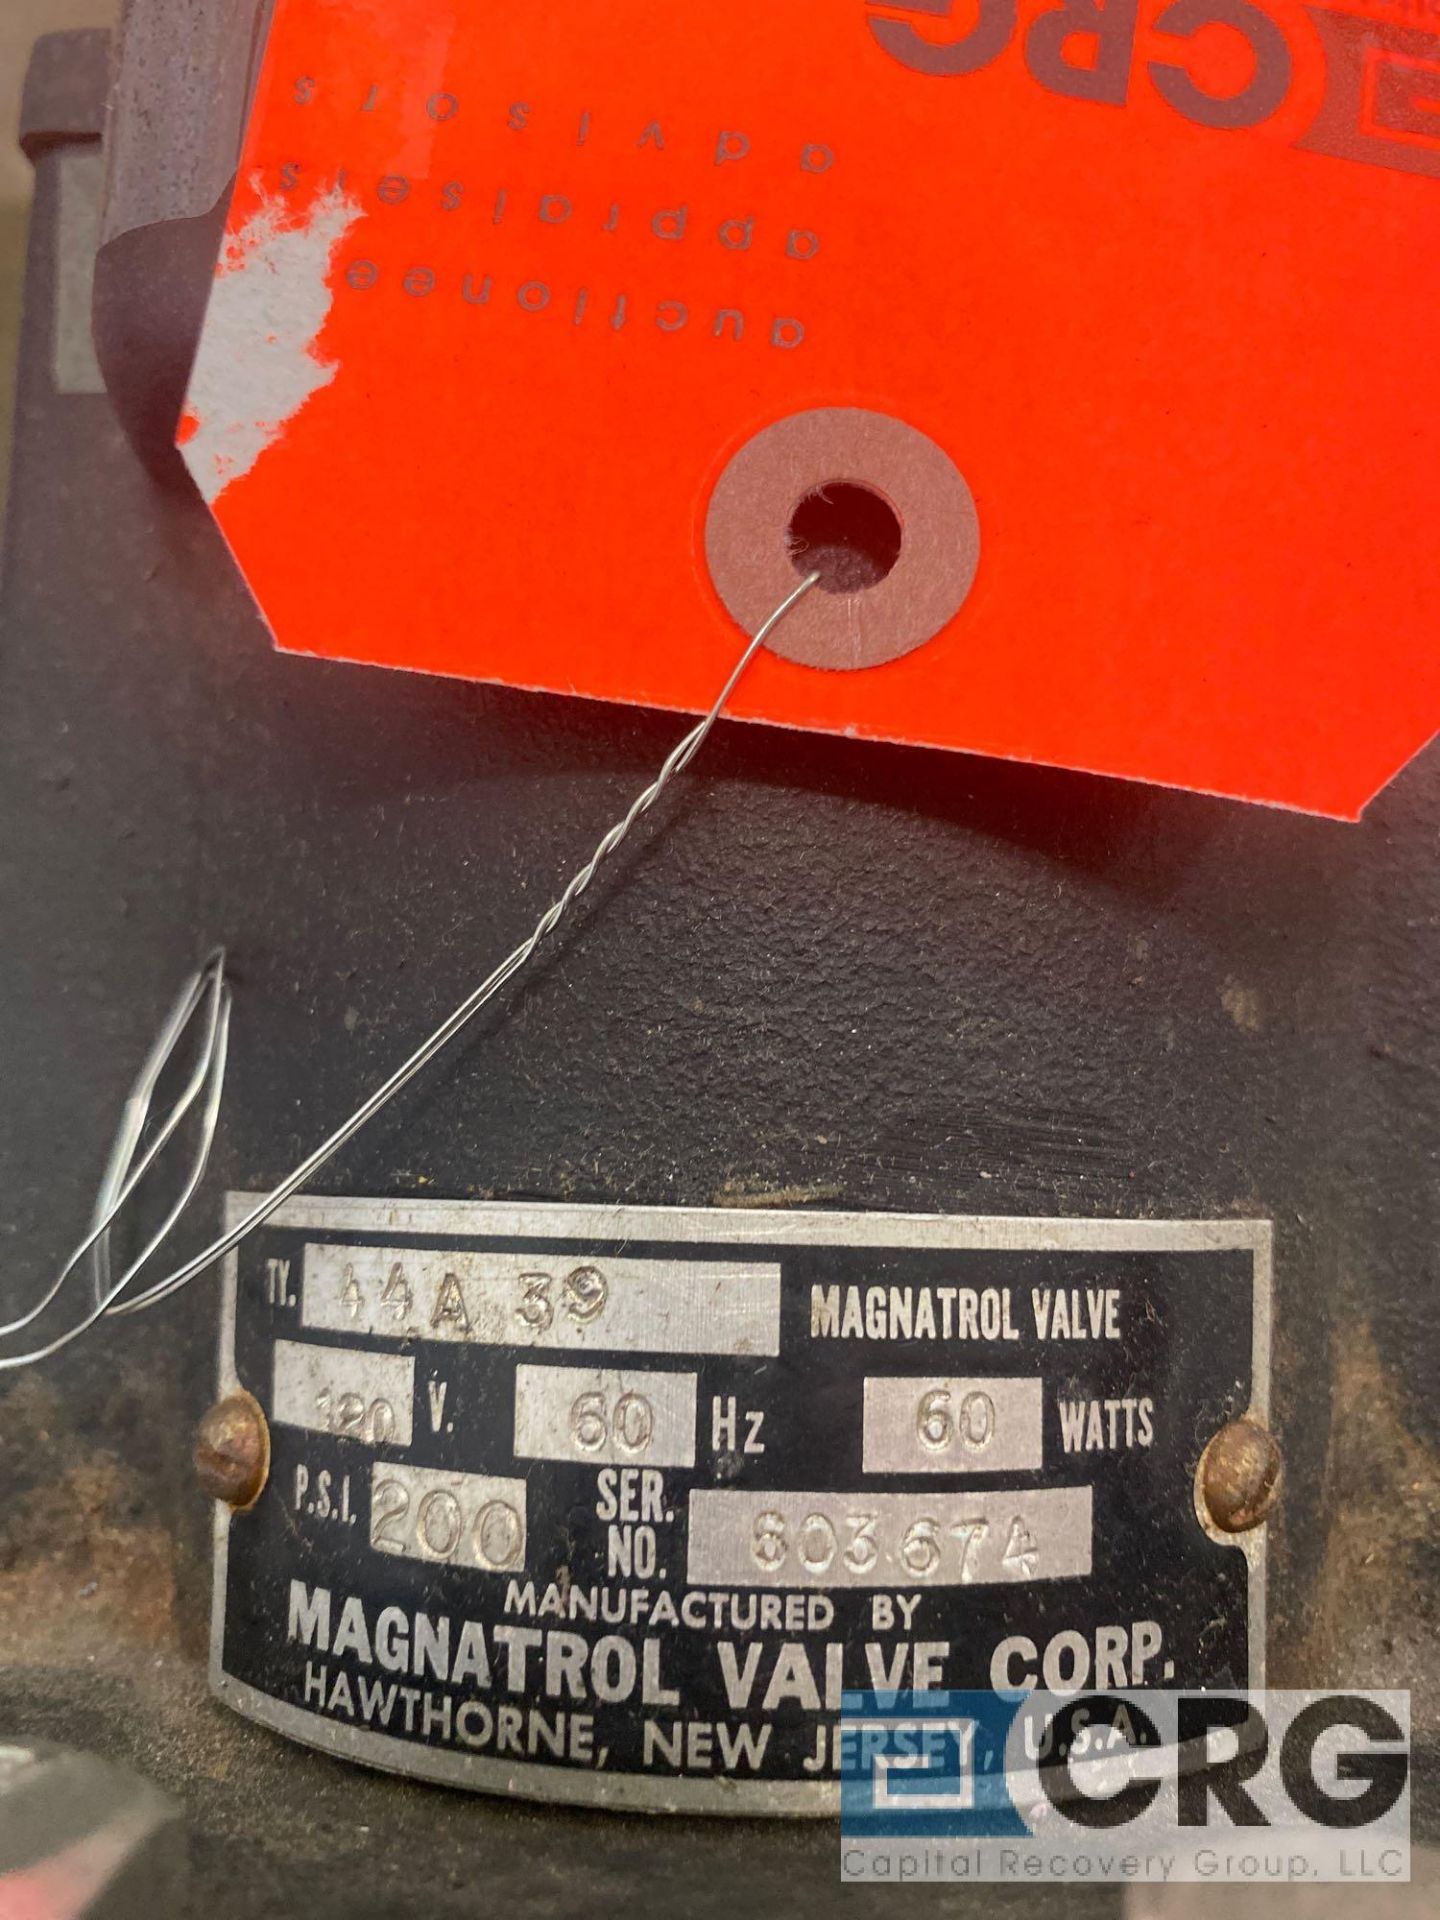 Magnetron Valve Corp. 44A39 magnatrol valve, 200 PSI, 3.5 in. I.D. - Image 2 of 3